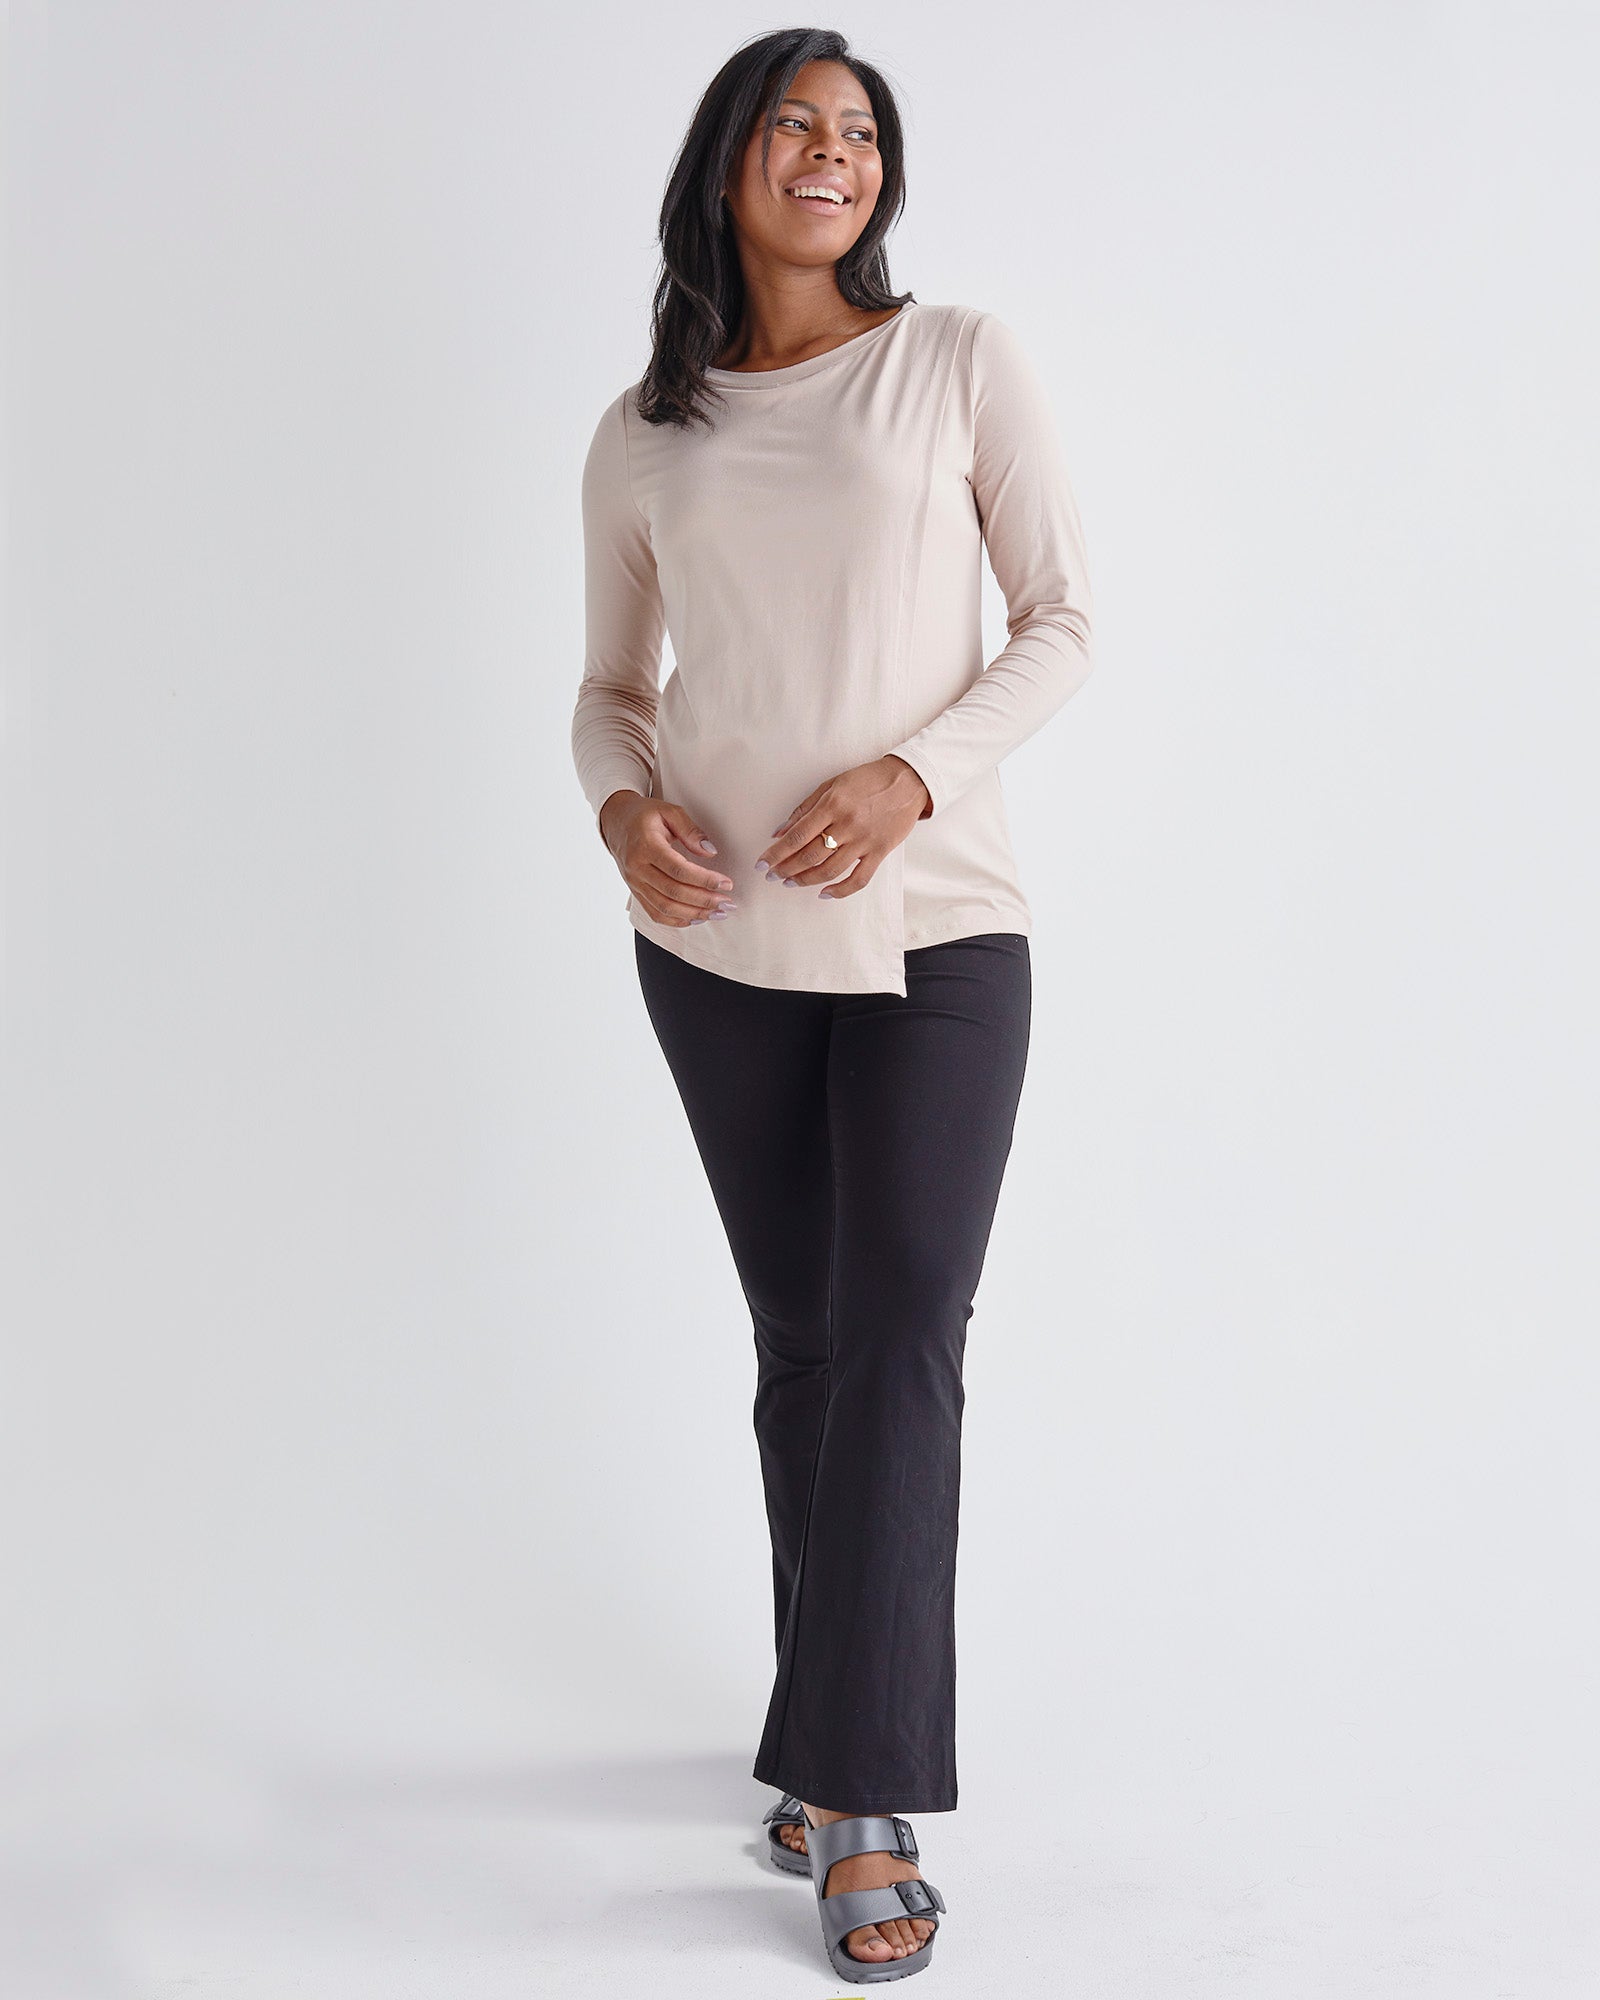 Full View - Long Sleeve  Nursing Petal Top in Blush Pink and Black Pnats from Angel maternity